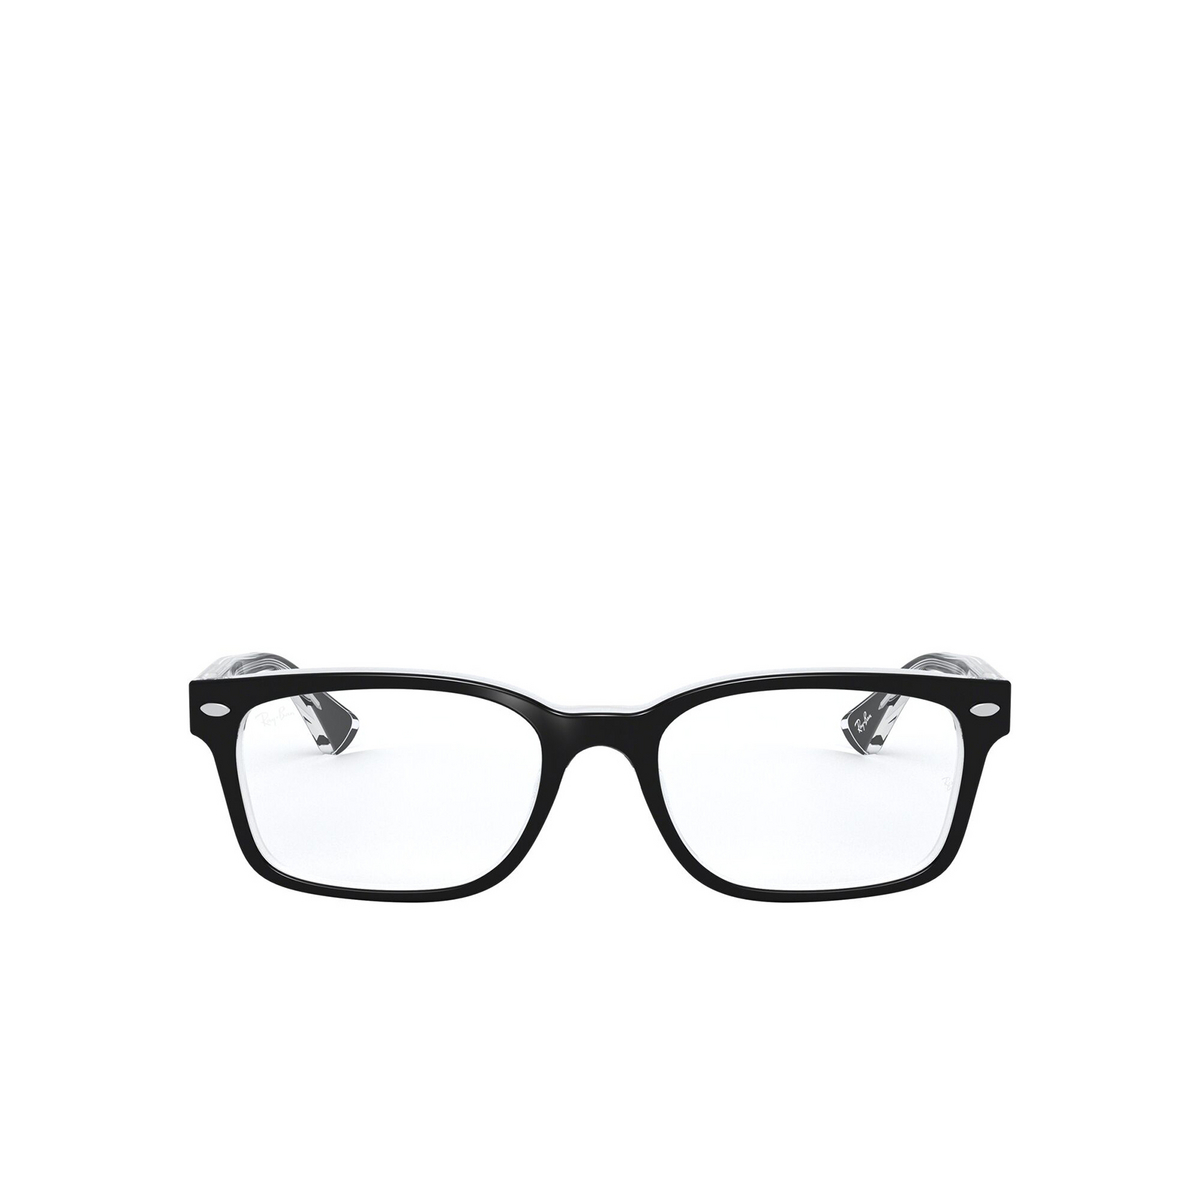 Ray-Ban® Square Eyeglasses: RX5286 color Black On Transparent 2034 - front view.